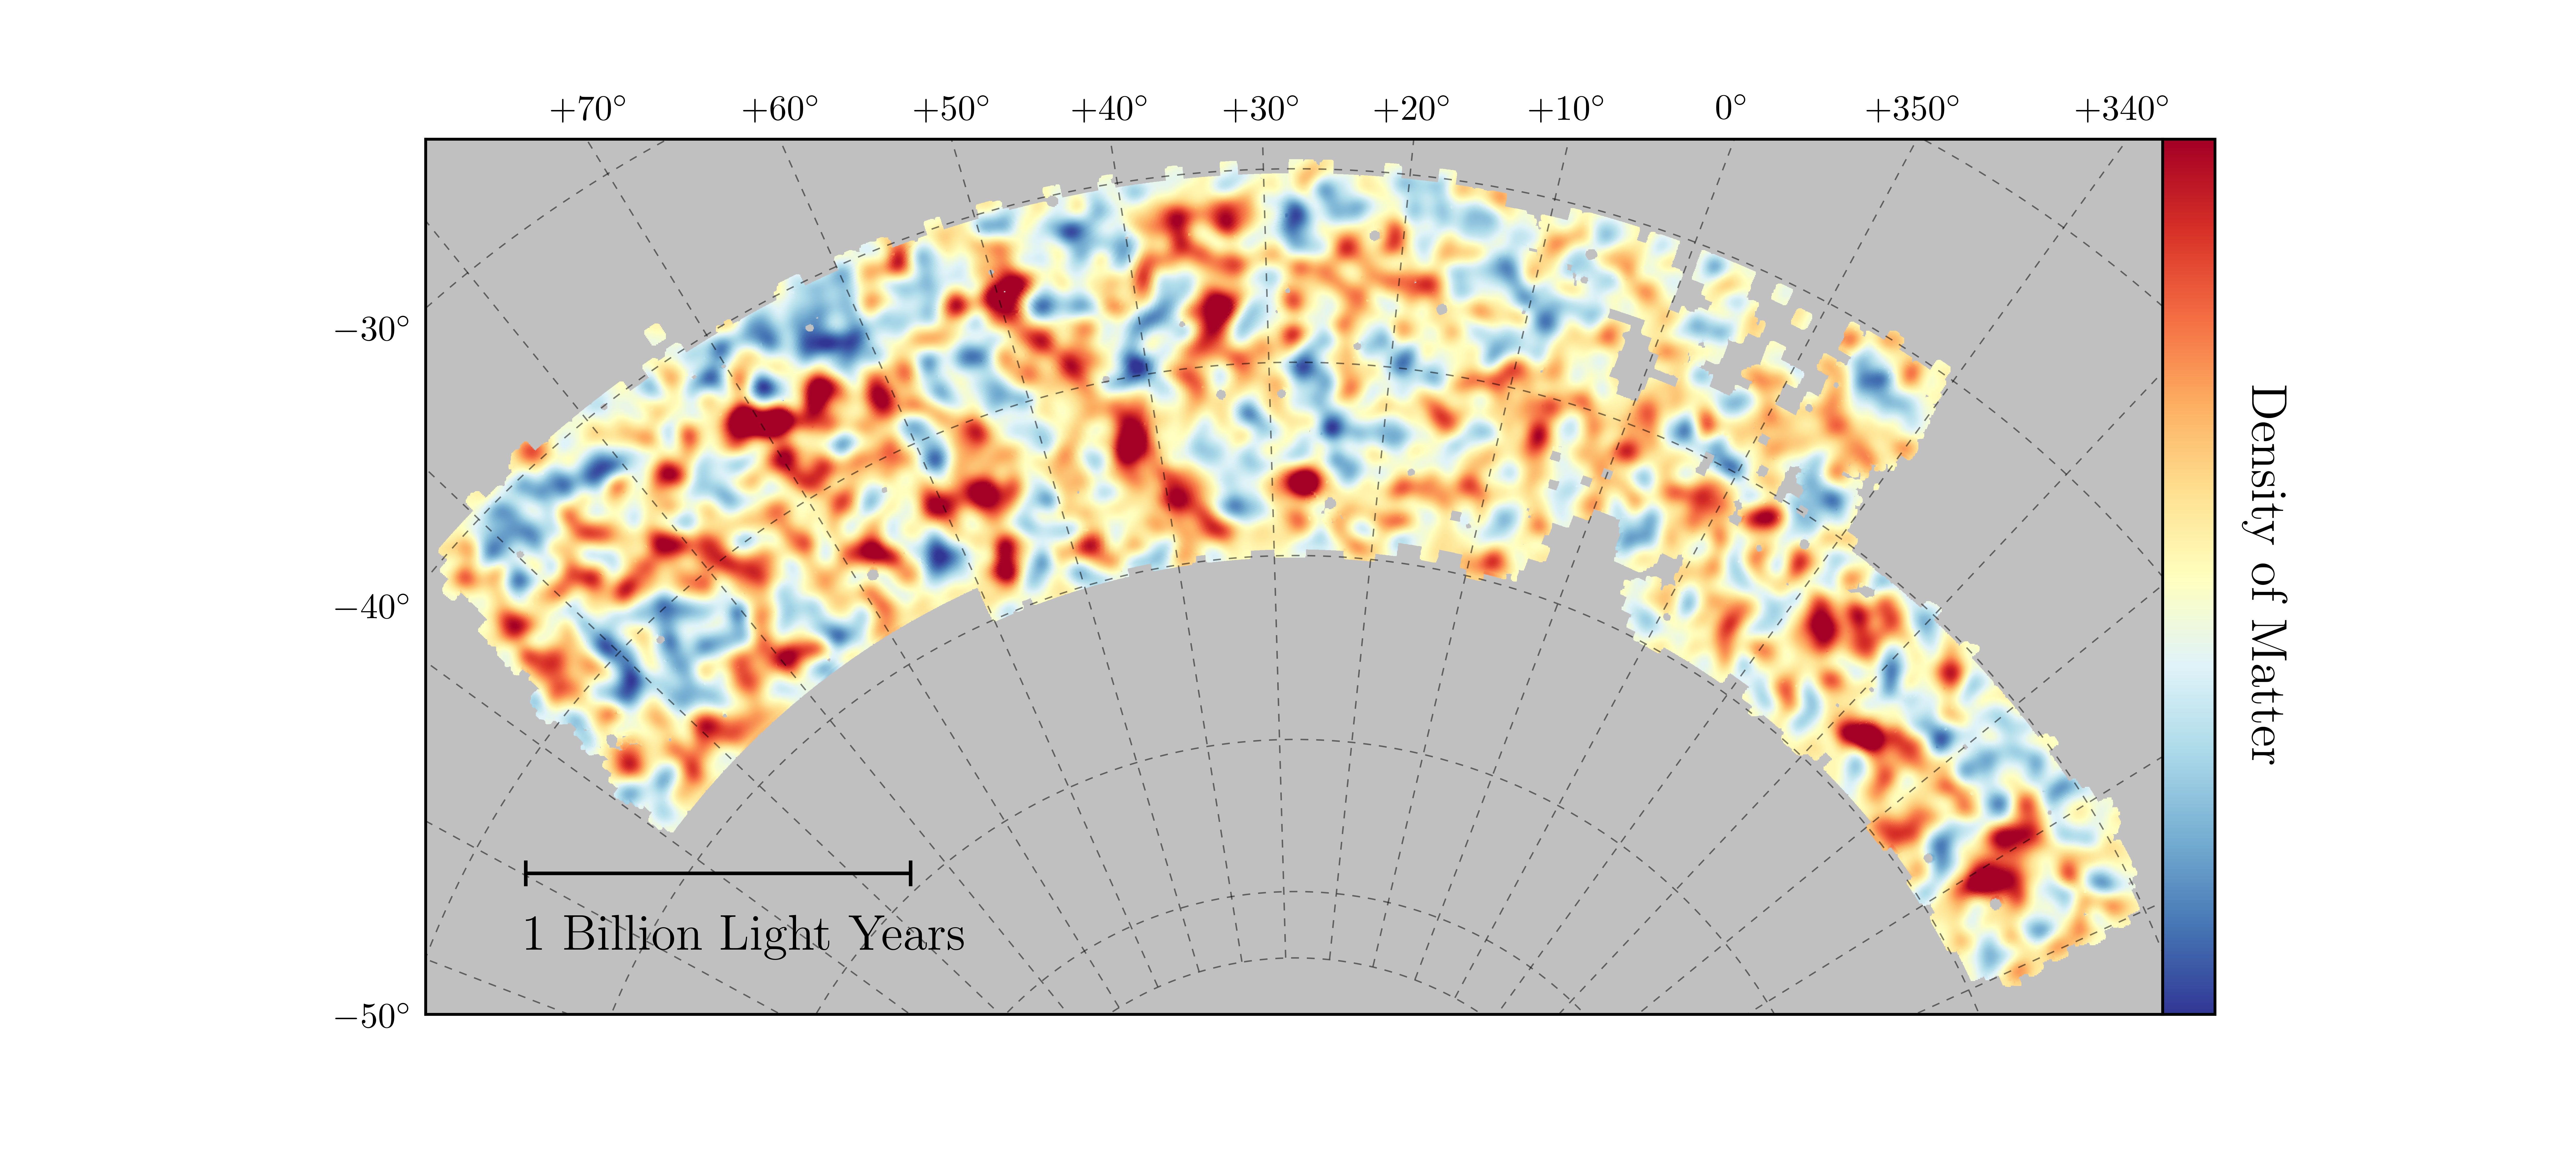 Large-Scale Structure - The Dark Energy Survey